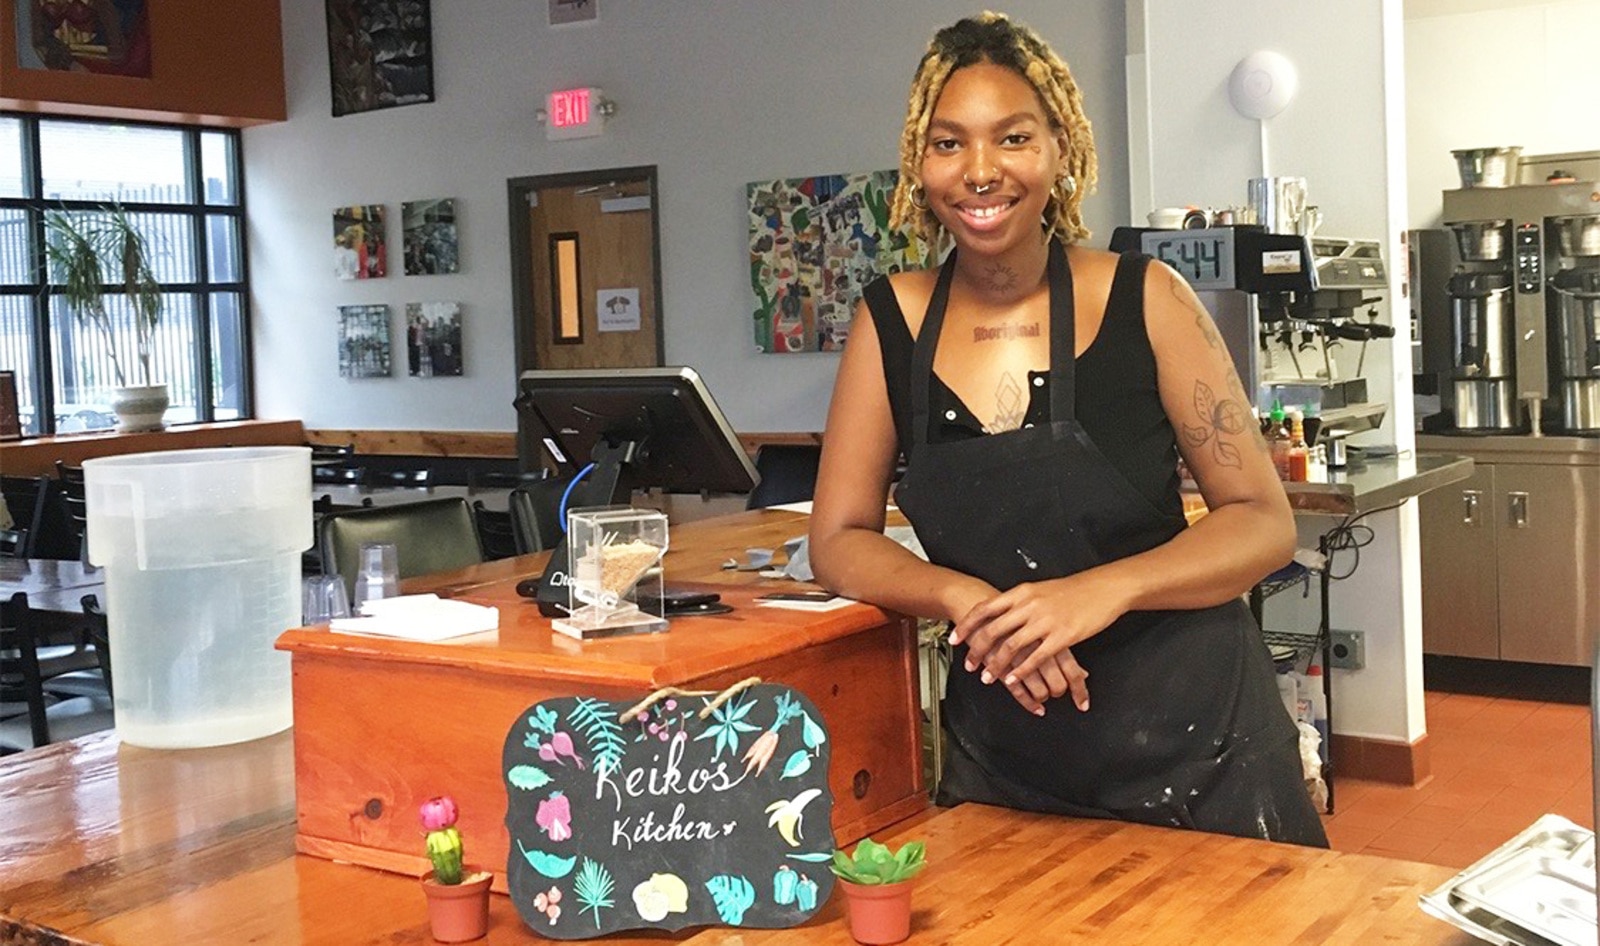 22-Year-Old Vegan Chef Starts Project to Support Black-Led Vegan Events, Pop-ups, and Entrepreneurs in Minneapolis